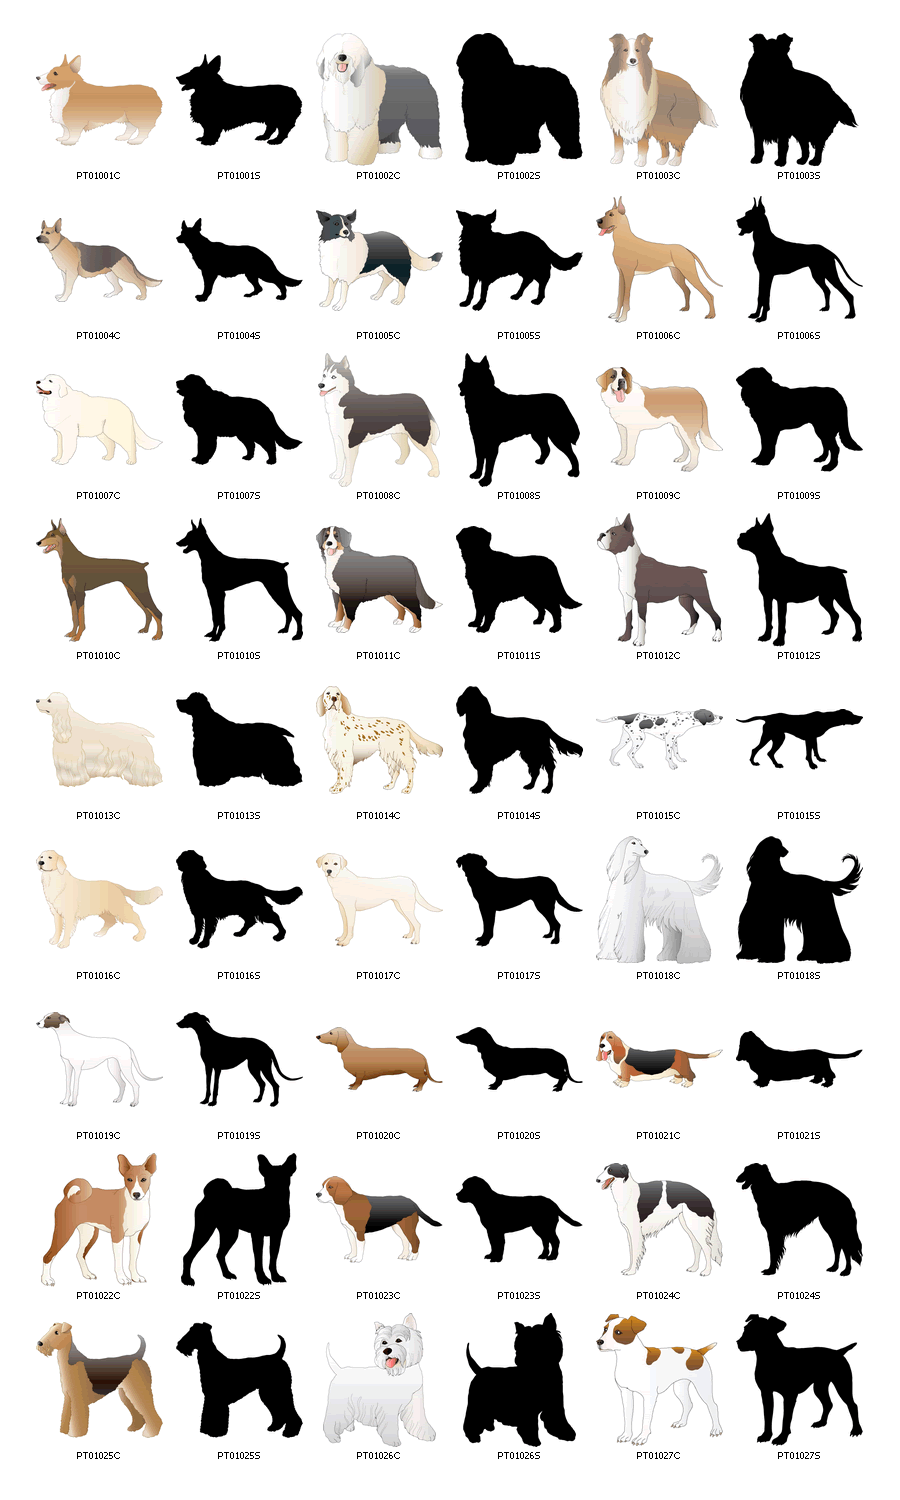 Dogs Free Vector Clipart Down - Free Dog Clipart